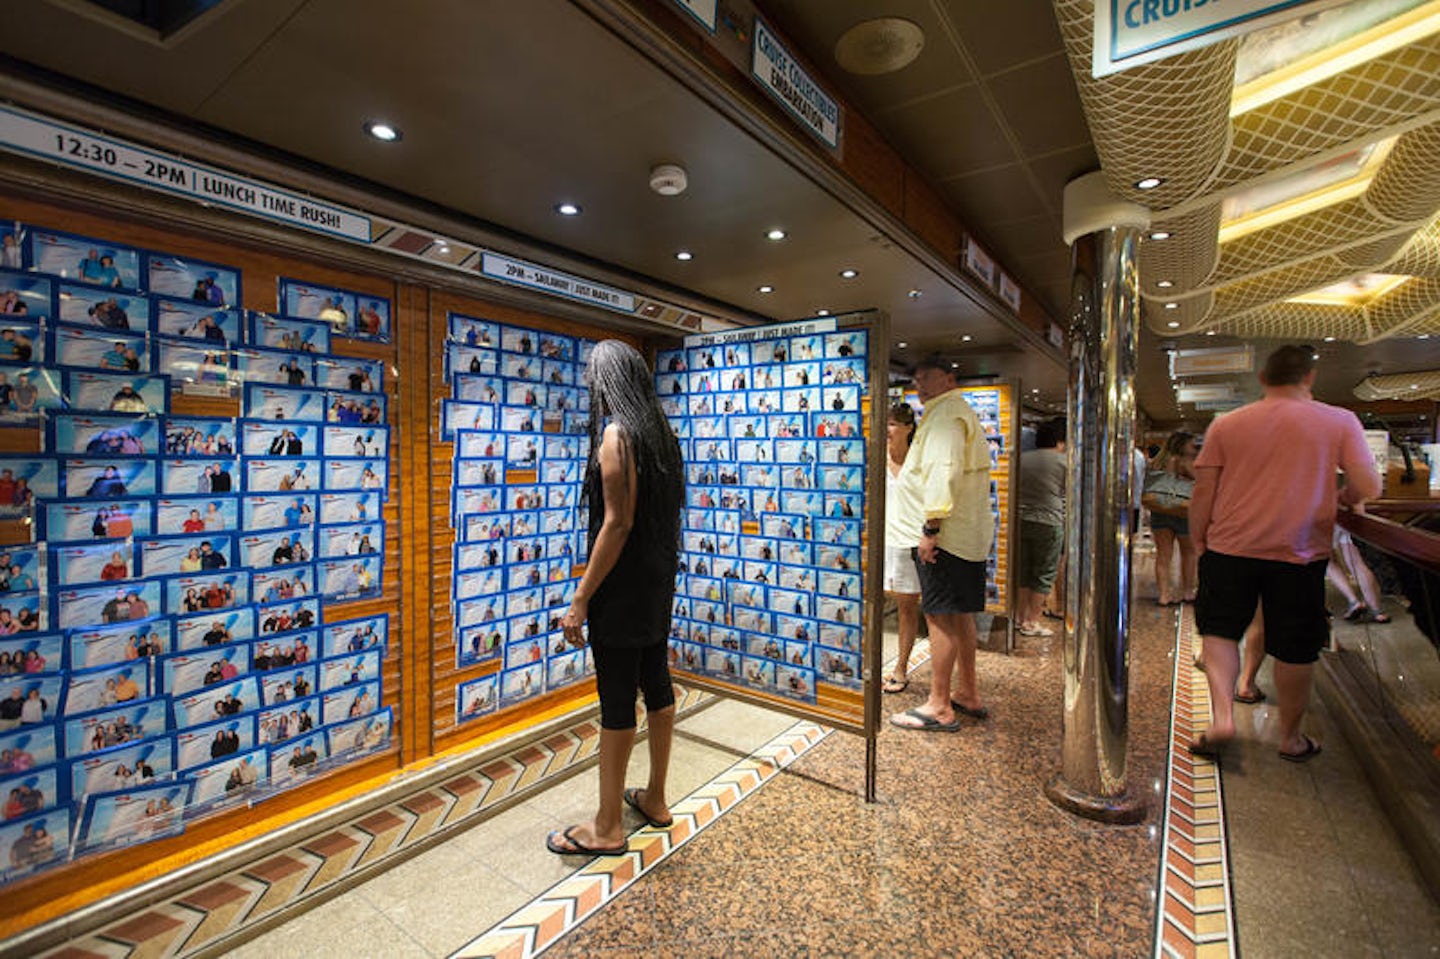 Photo and Video Gallery on Carnival Conquest